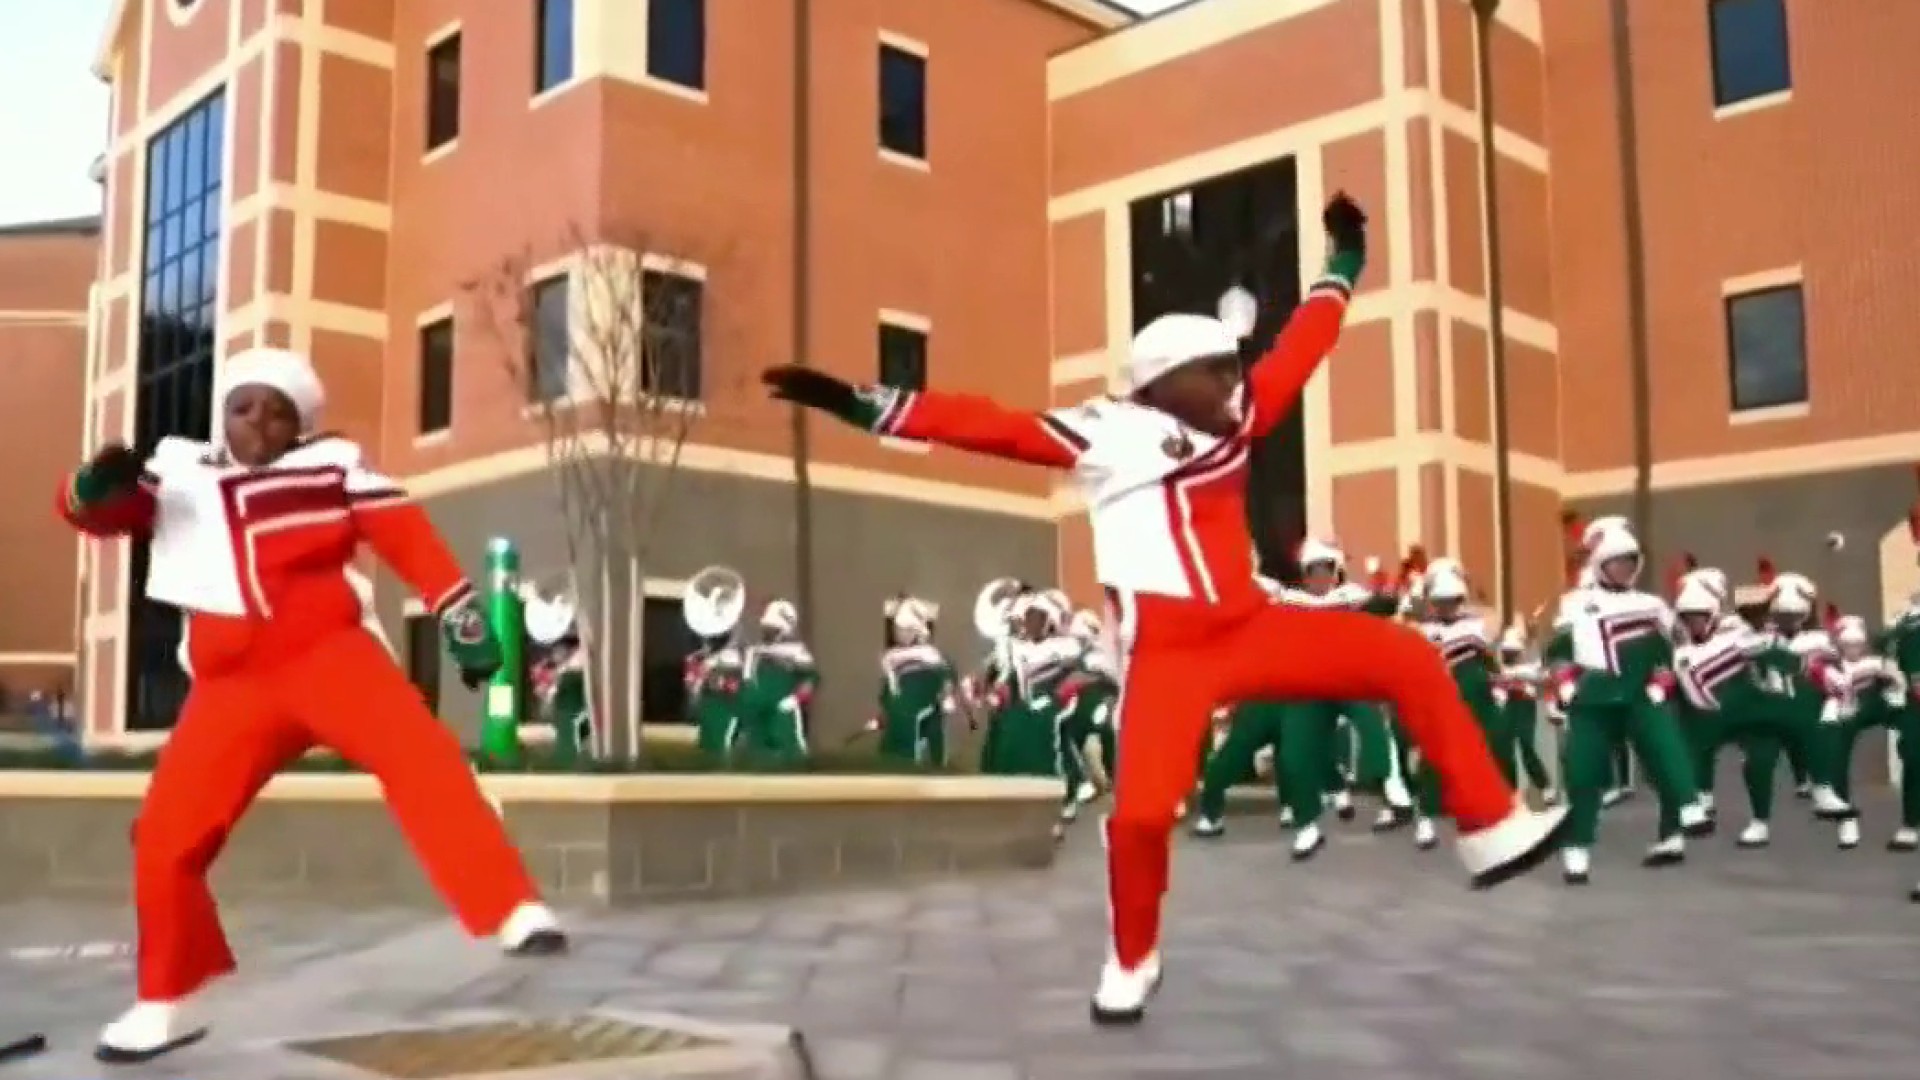 FAMU's Marching 100 performs in virtual event for presidential inauguration